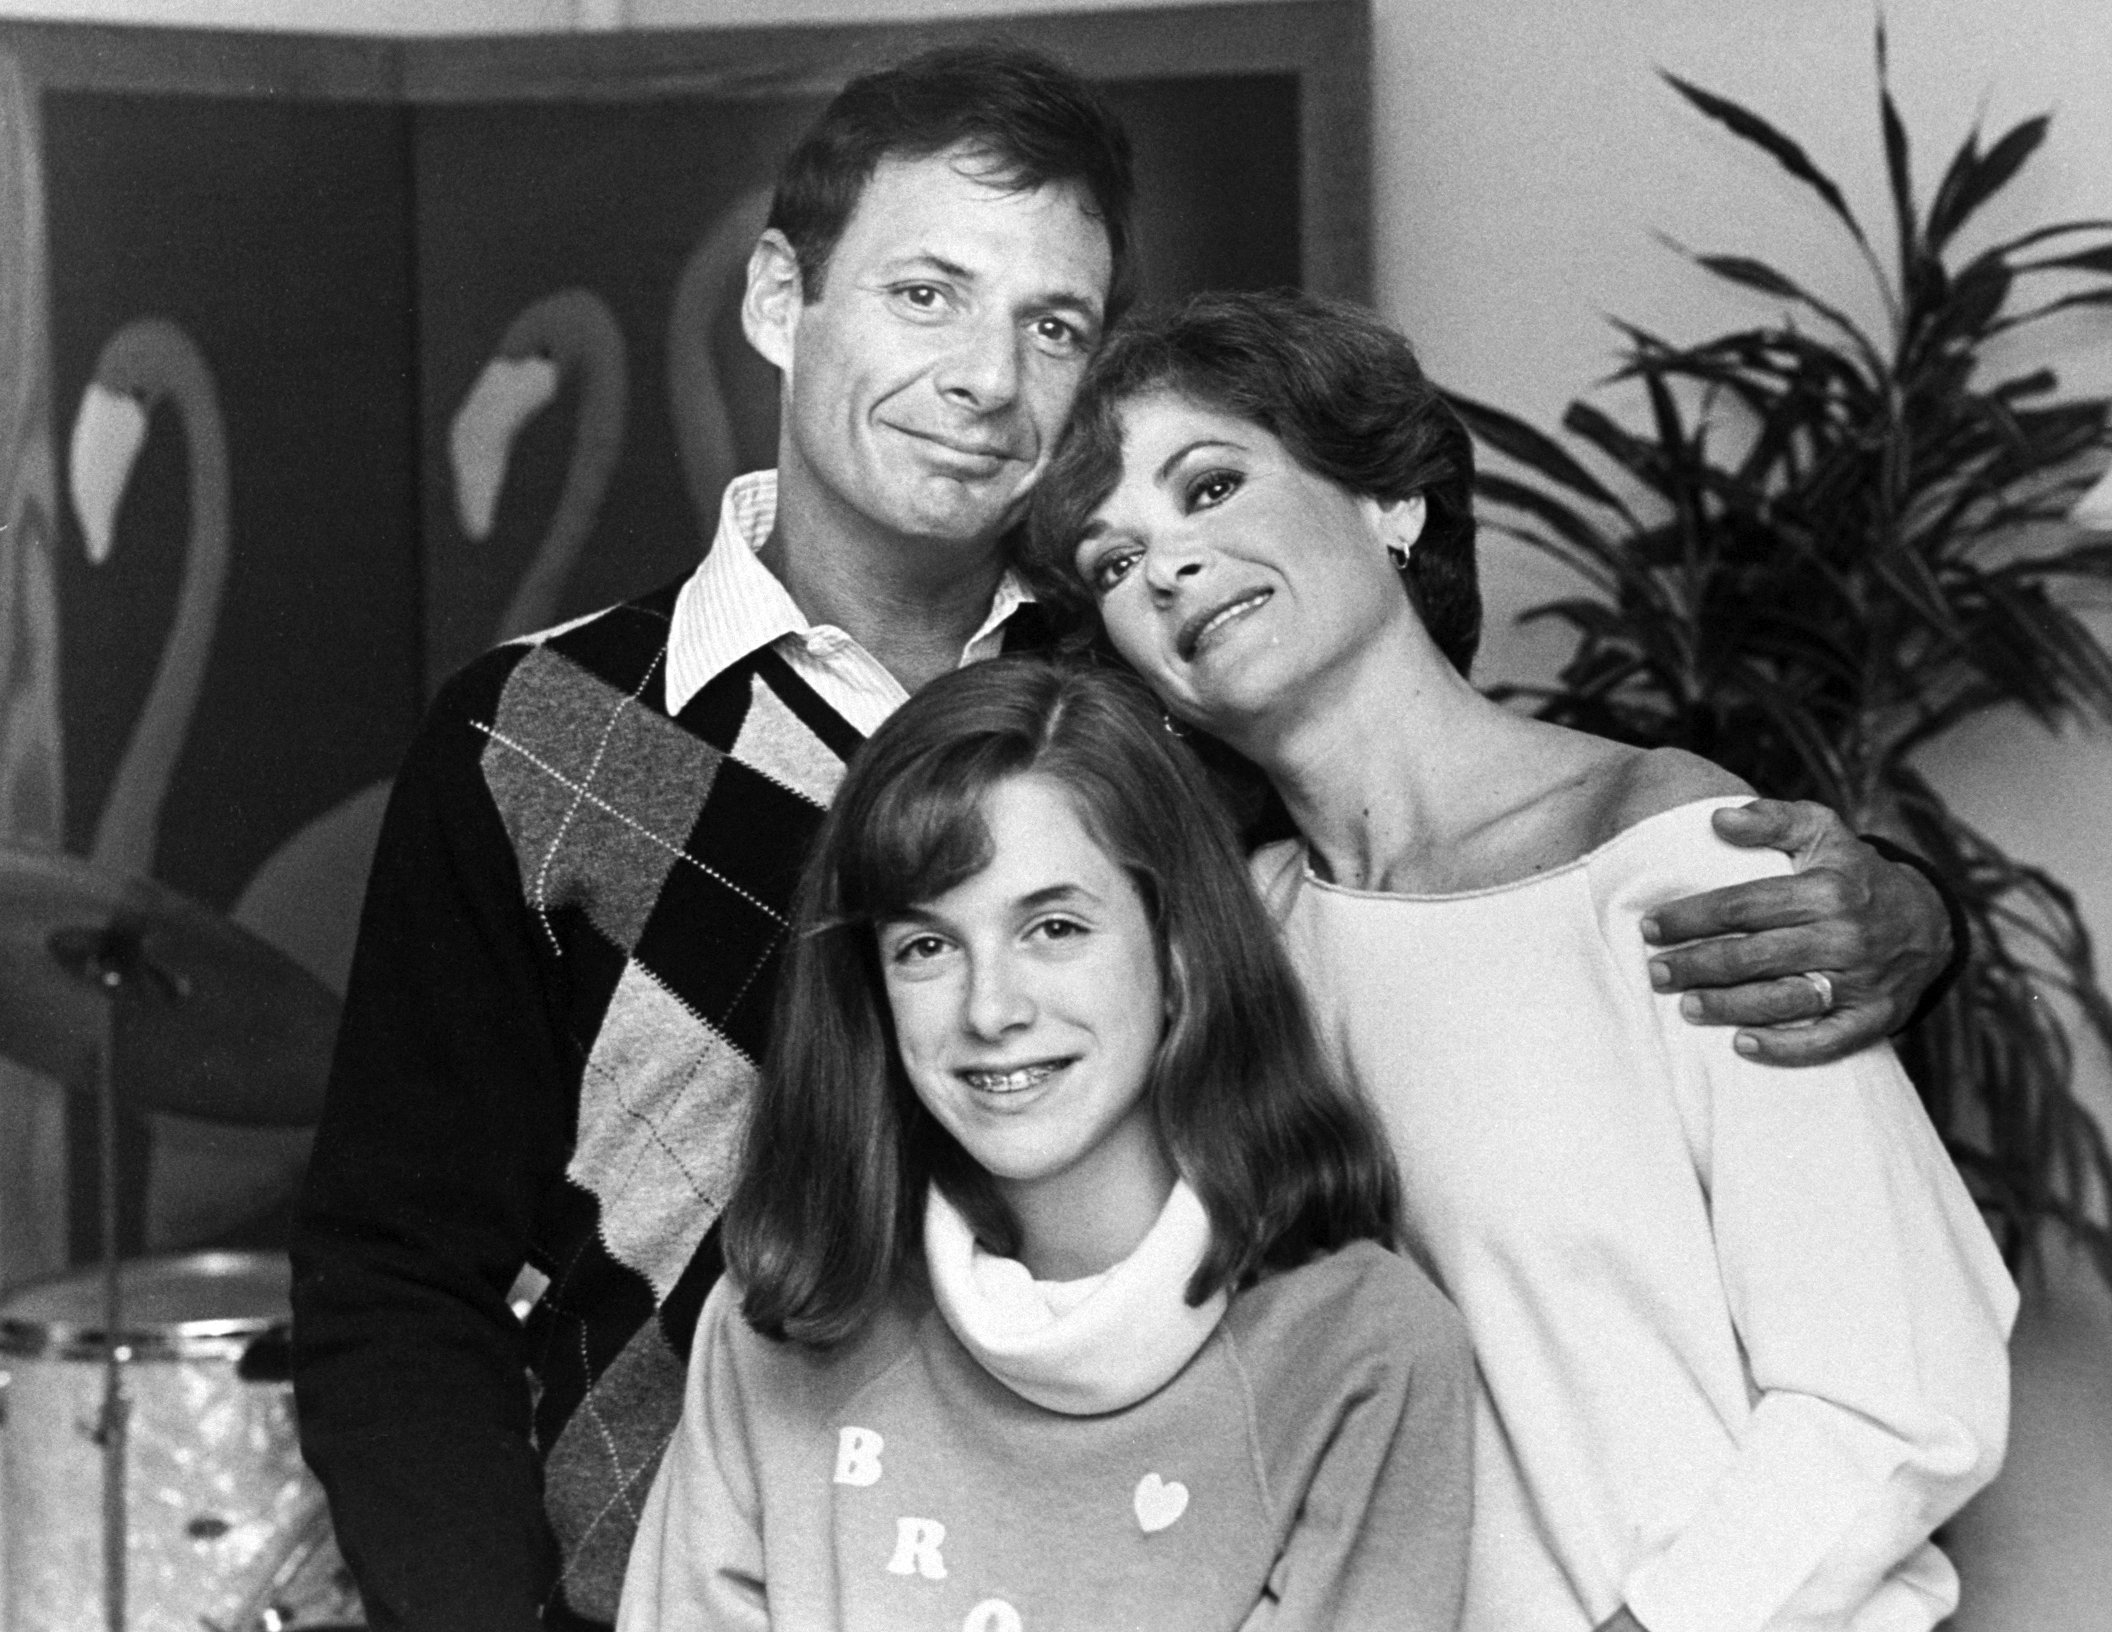 A black and white photo of actor Ron Leibman with his arm around wife and 'Arrested Develoment' star Jessica Walter and her daughter, Brooke Bowman